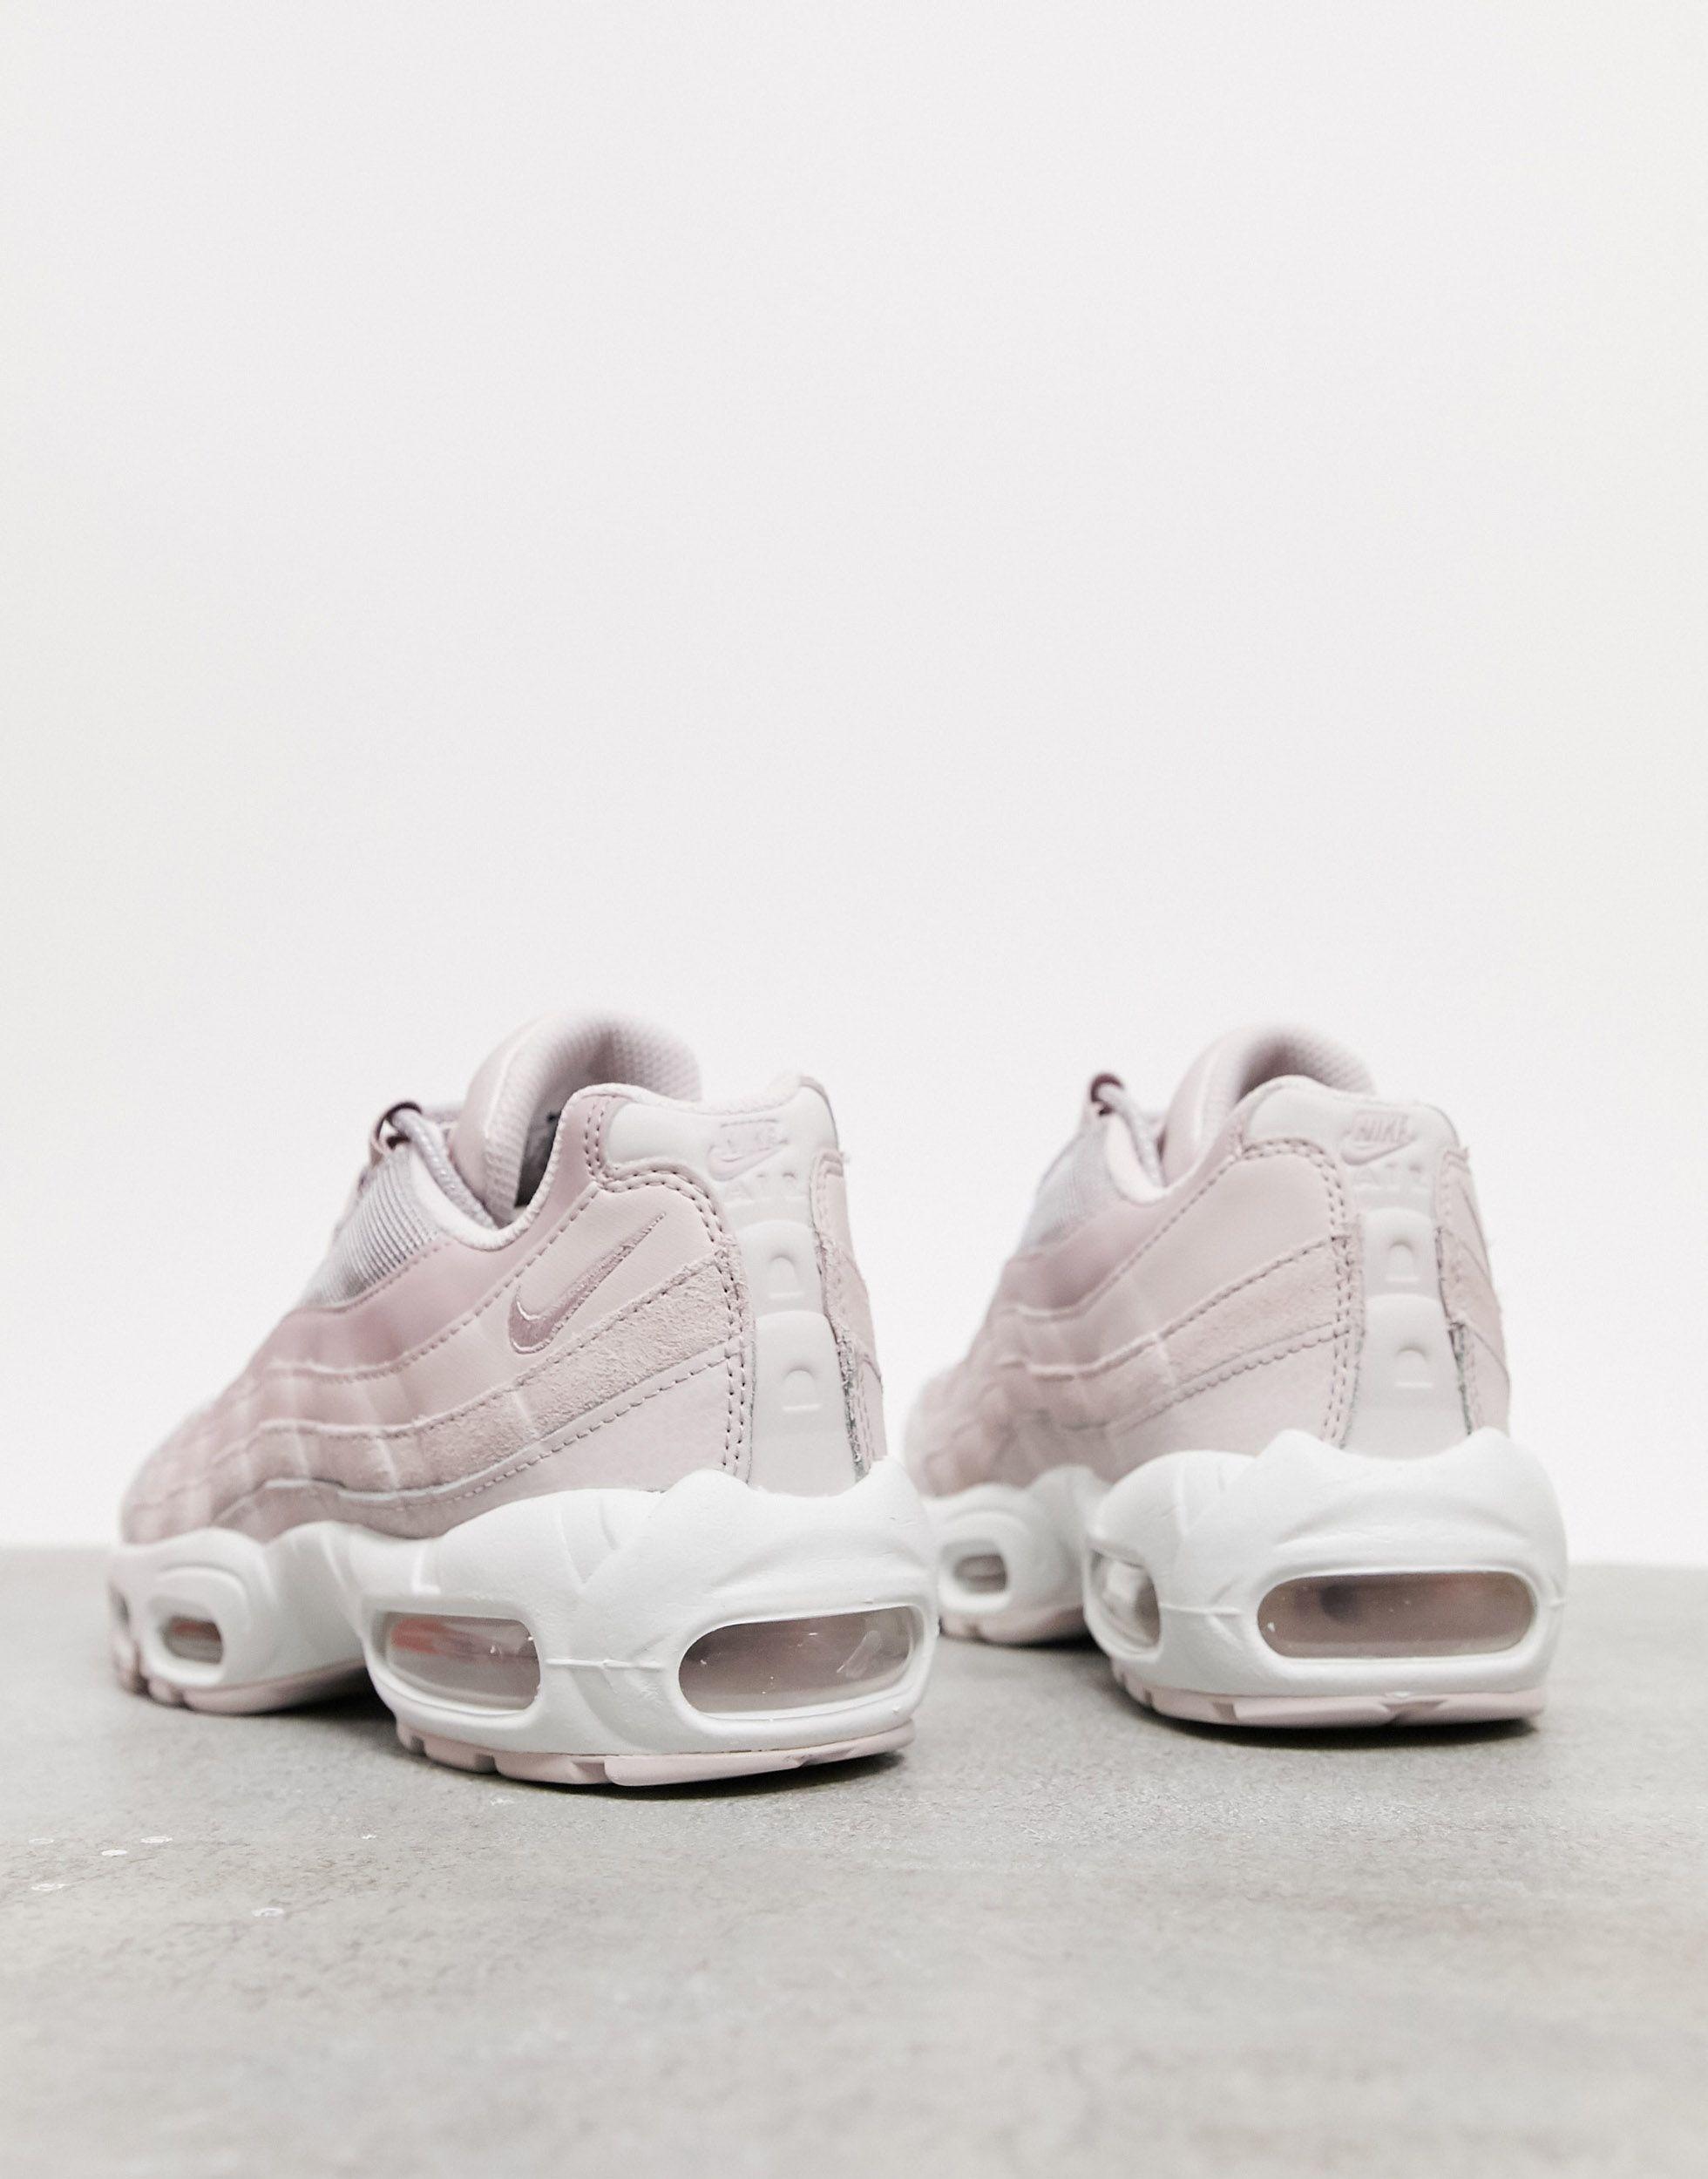 Nike Rubber Air Max 95 Trainers With 